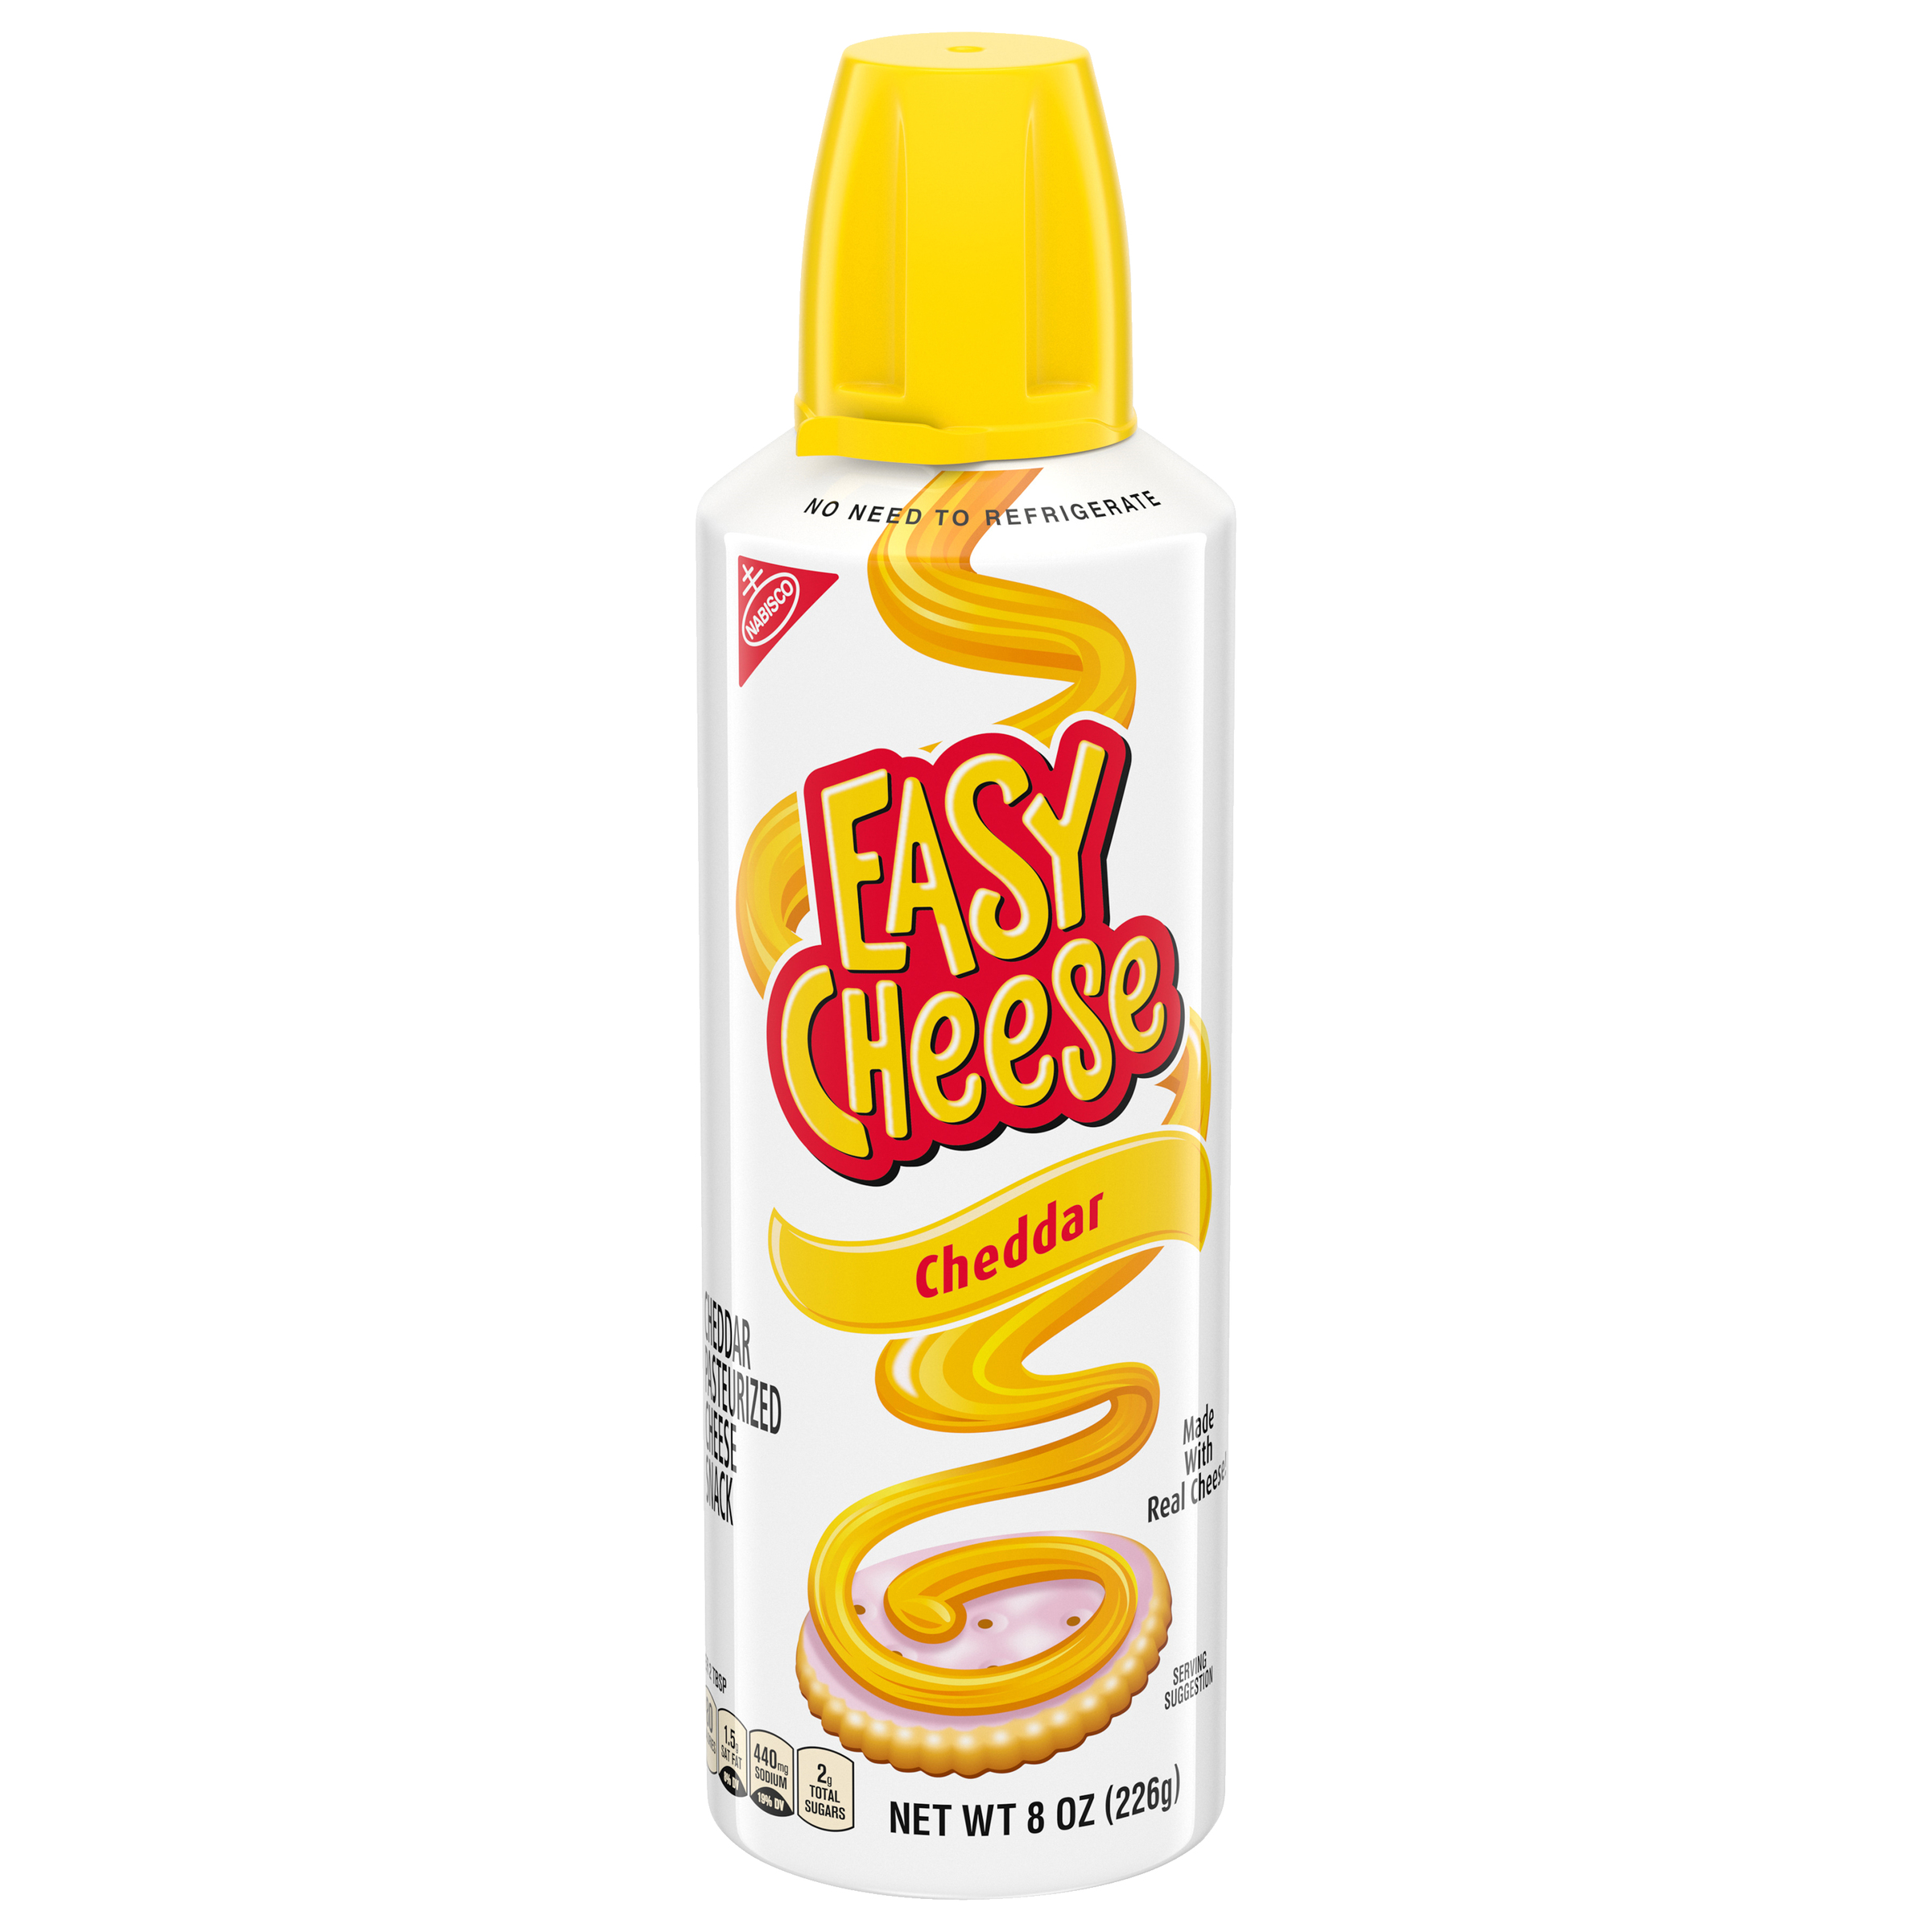 Easy Cheese Cheddar Cheese Snack, 8 oz-0